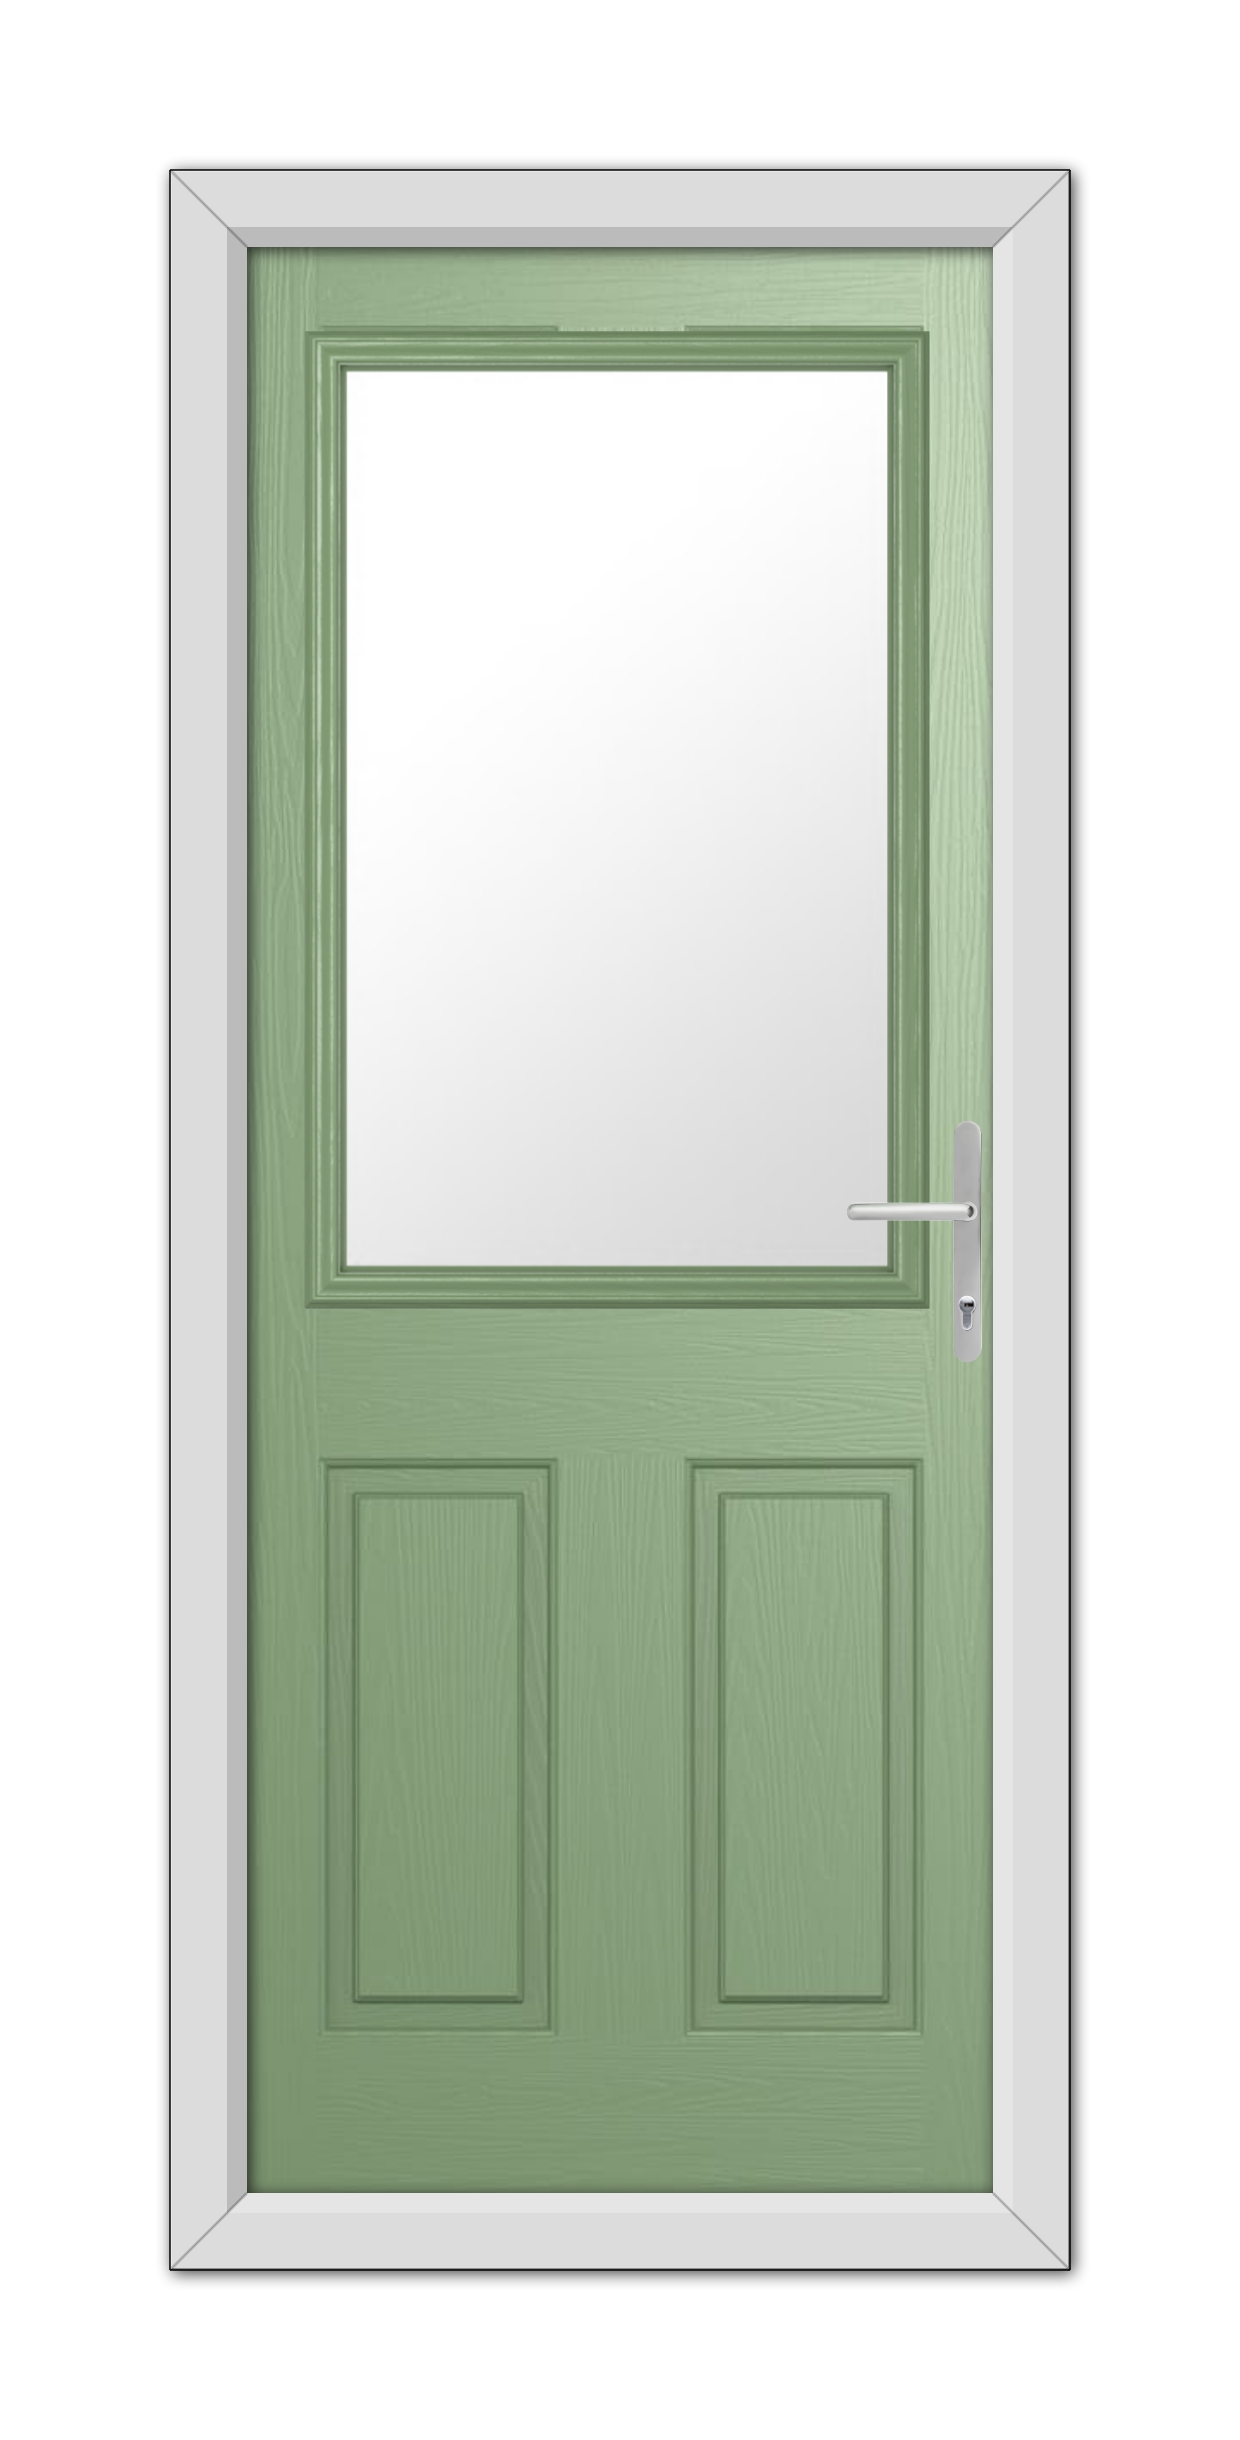 A Chartwell Green Buxton Composite Door with a clear rectangular pane of glass at the top, framed in a white doorframe, featuring a silver handle on the right side.